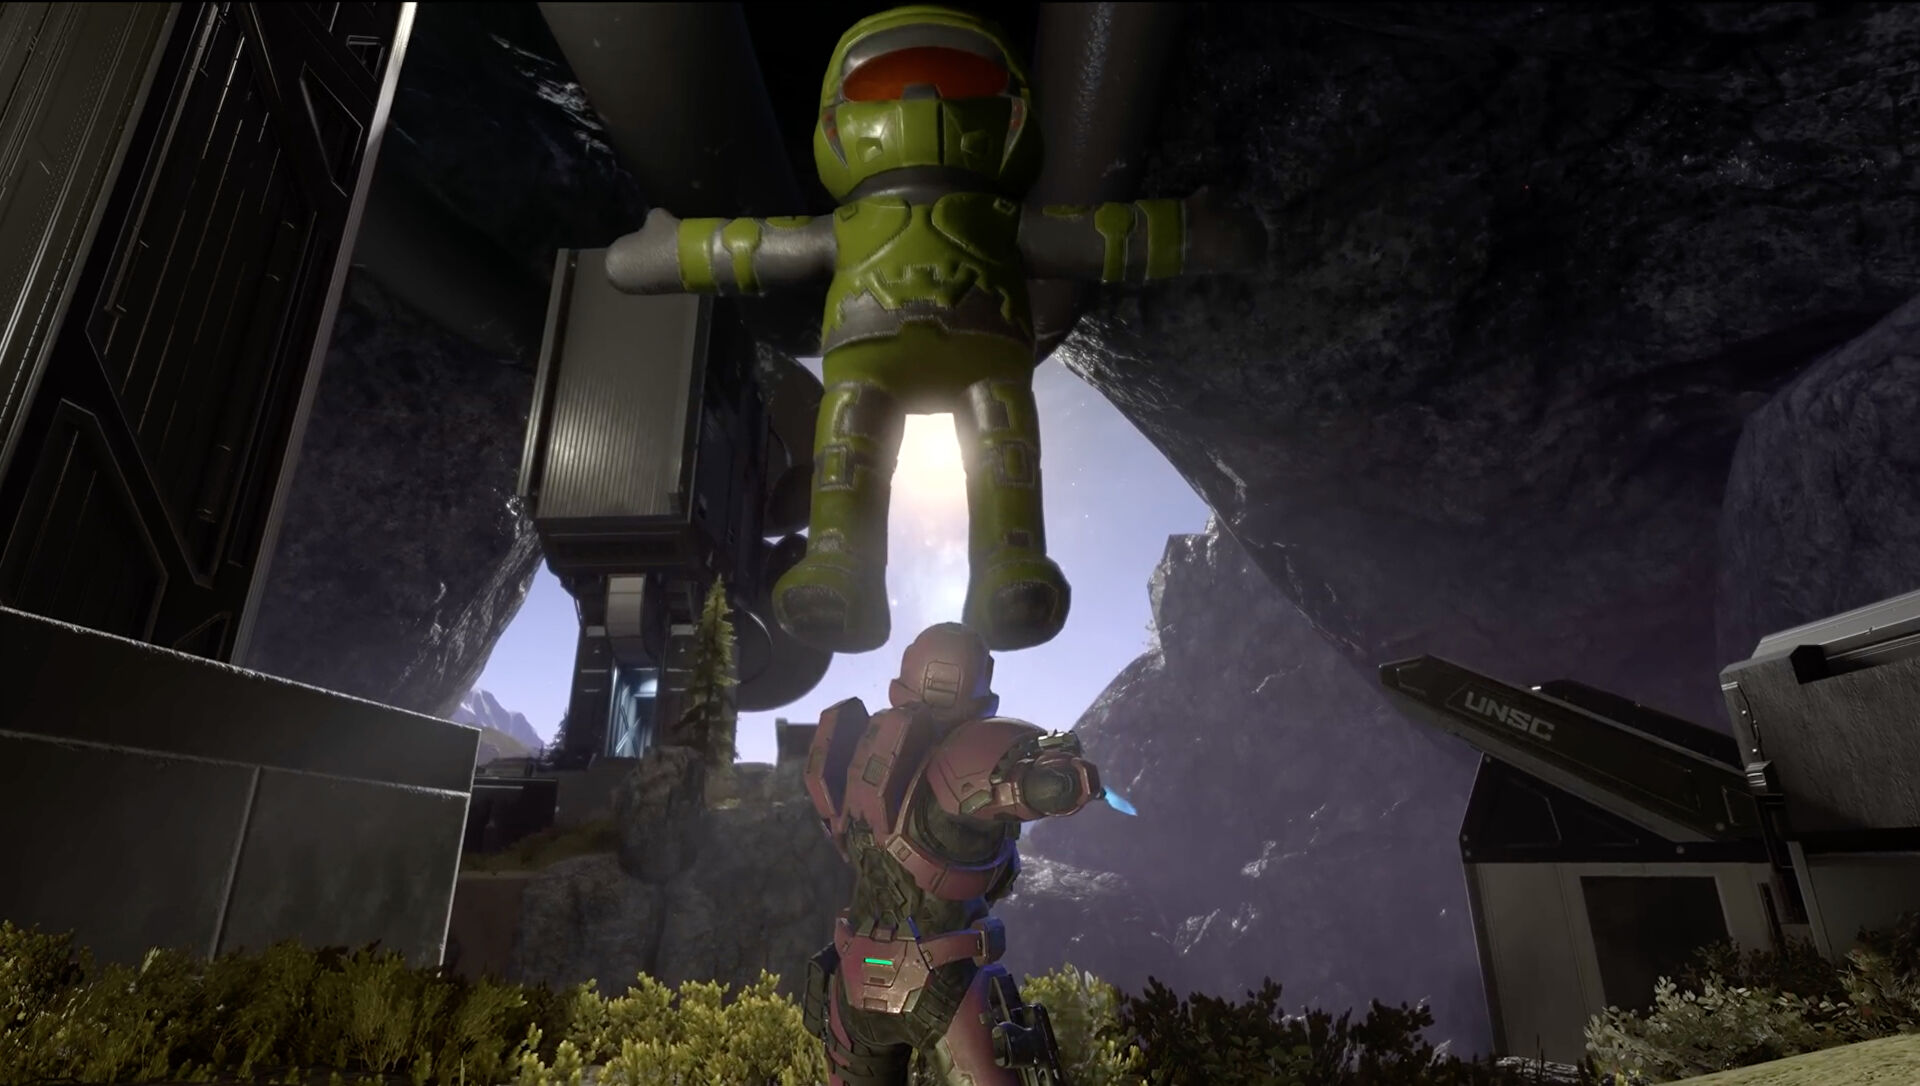 Halo Infinite players have already made some wild maps with Forge mode